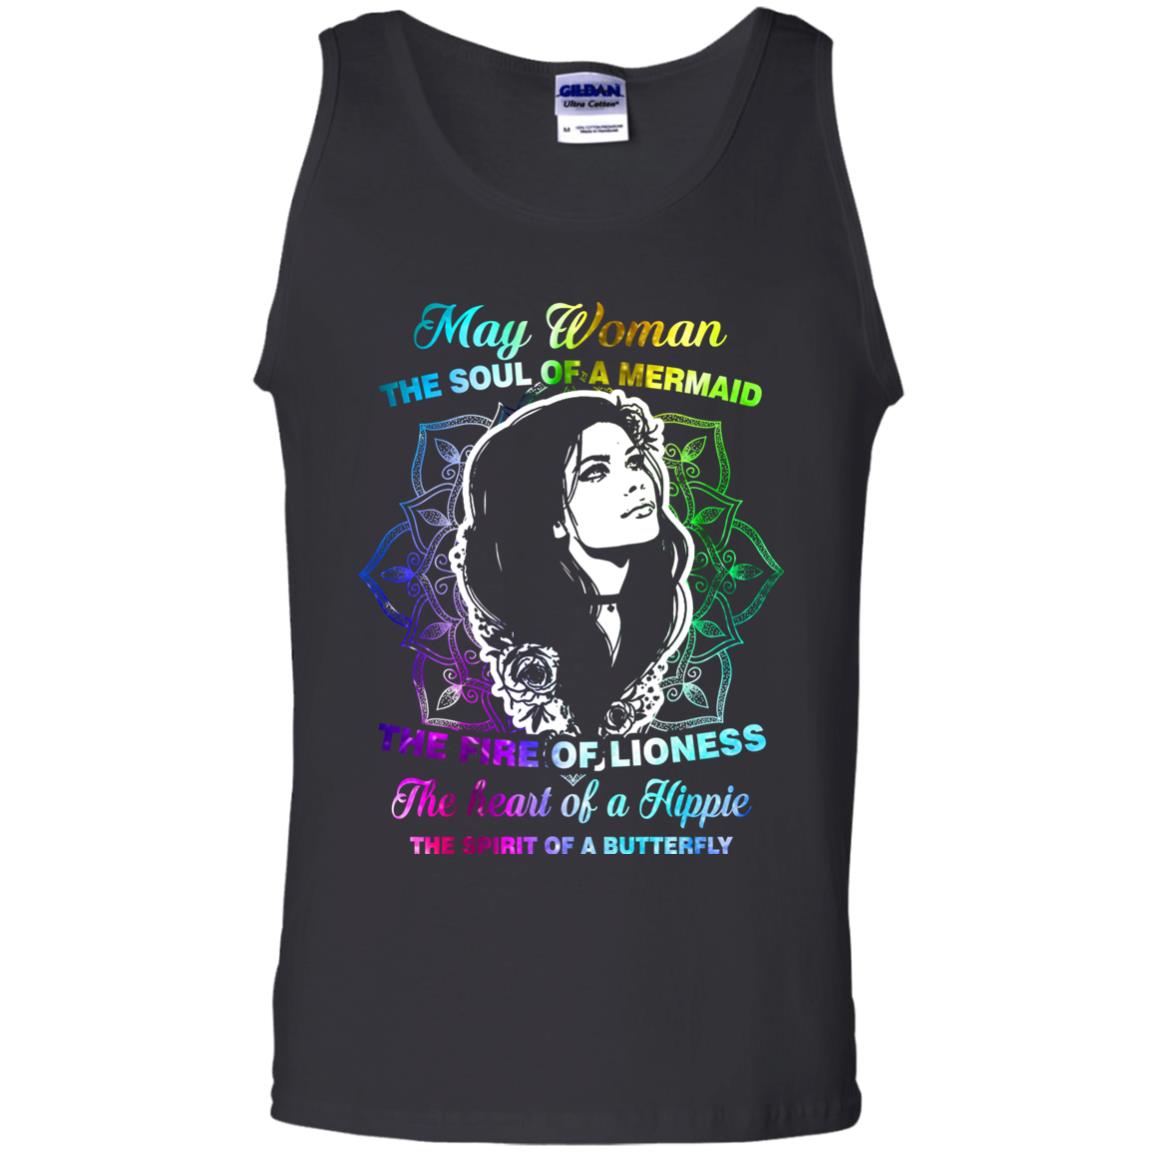 May Woman Shirt The Soul Of A Mermaid The Fire Of Lioness The Heart Of A Hippeie The Spirit Of A ButterflyG220 Gildan 100% Cotton Tank Top